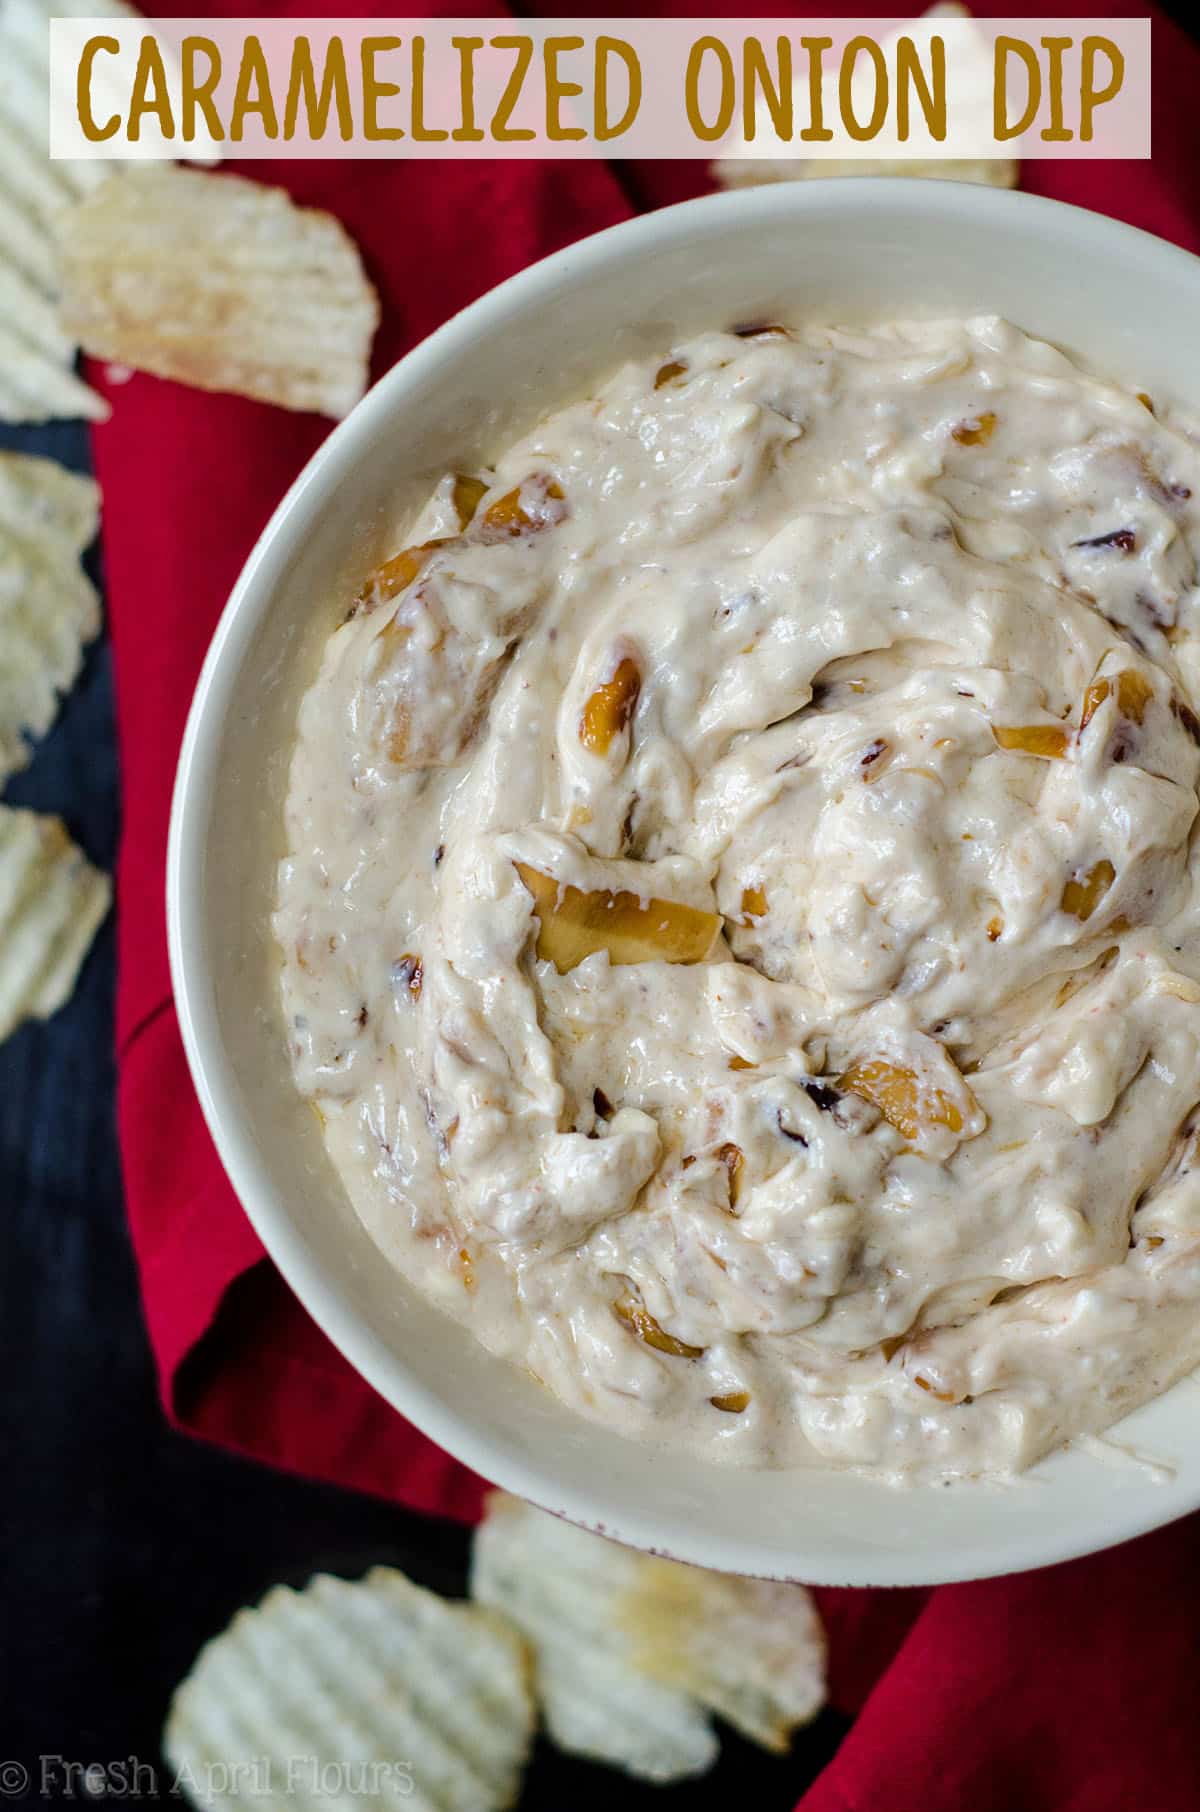 Caramelized Onion Dip: Creamy, flavorful dip bursting with sweet cooked onions. Perfect with both veggies and chips! via @frshaprilflours